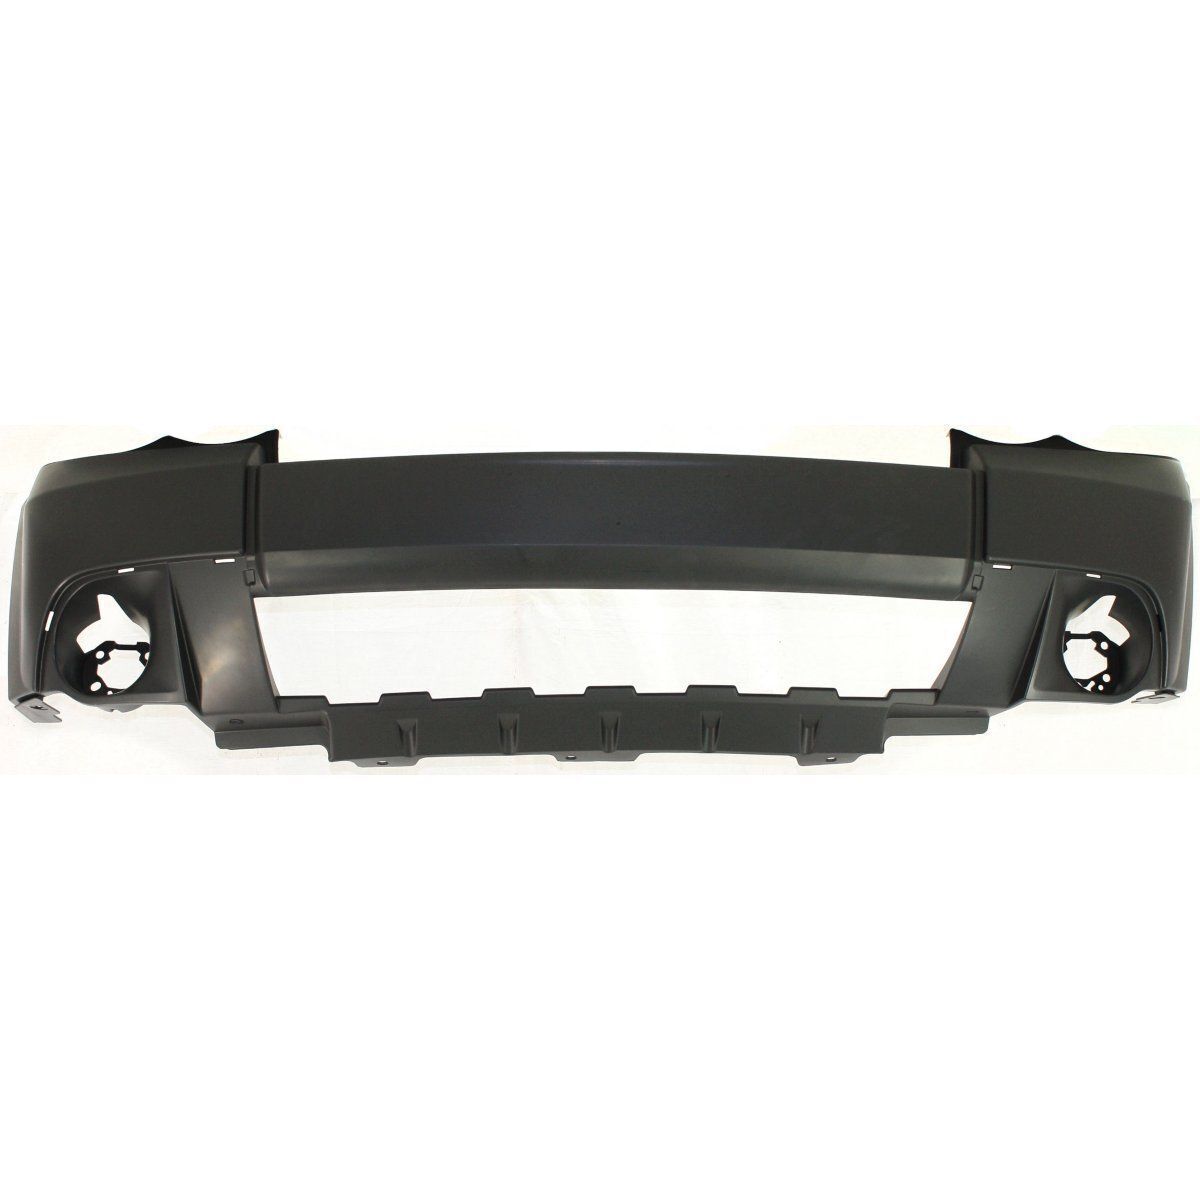 Front Bumper Cover For 2008-2010 Jeep Grand Cherokee w/ fog lamp holes Primed